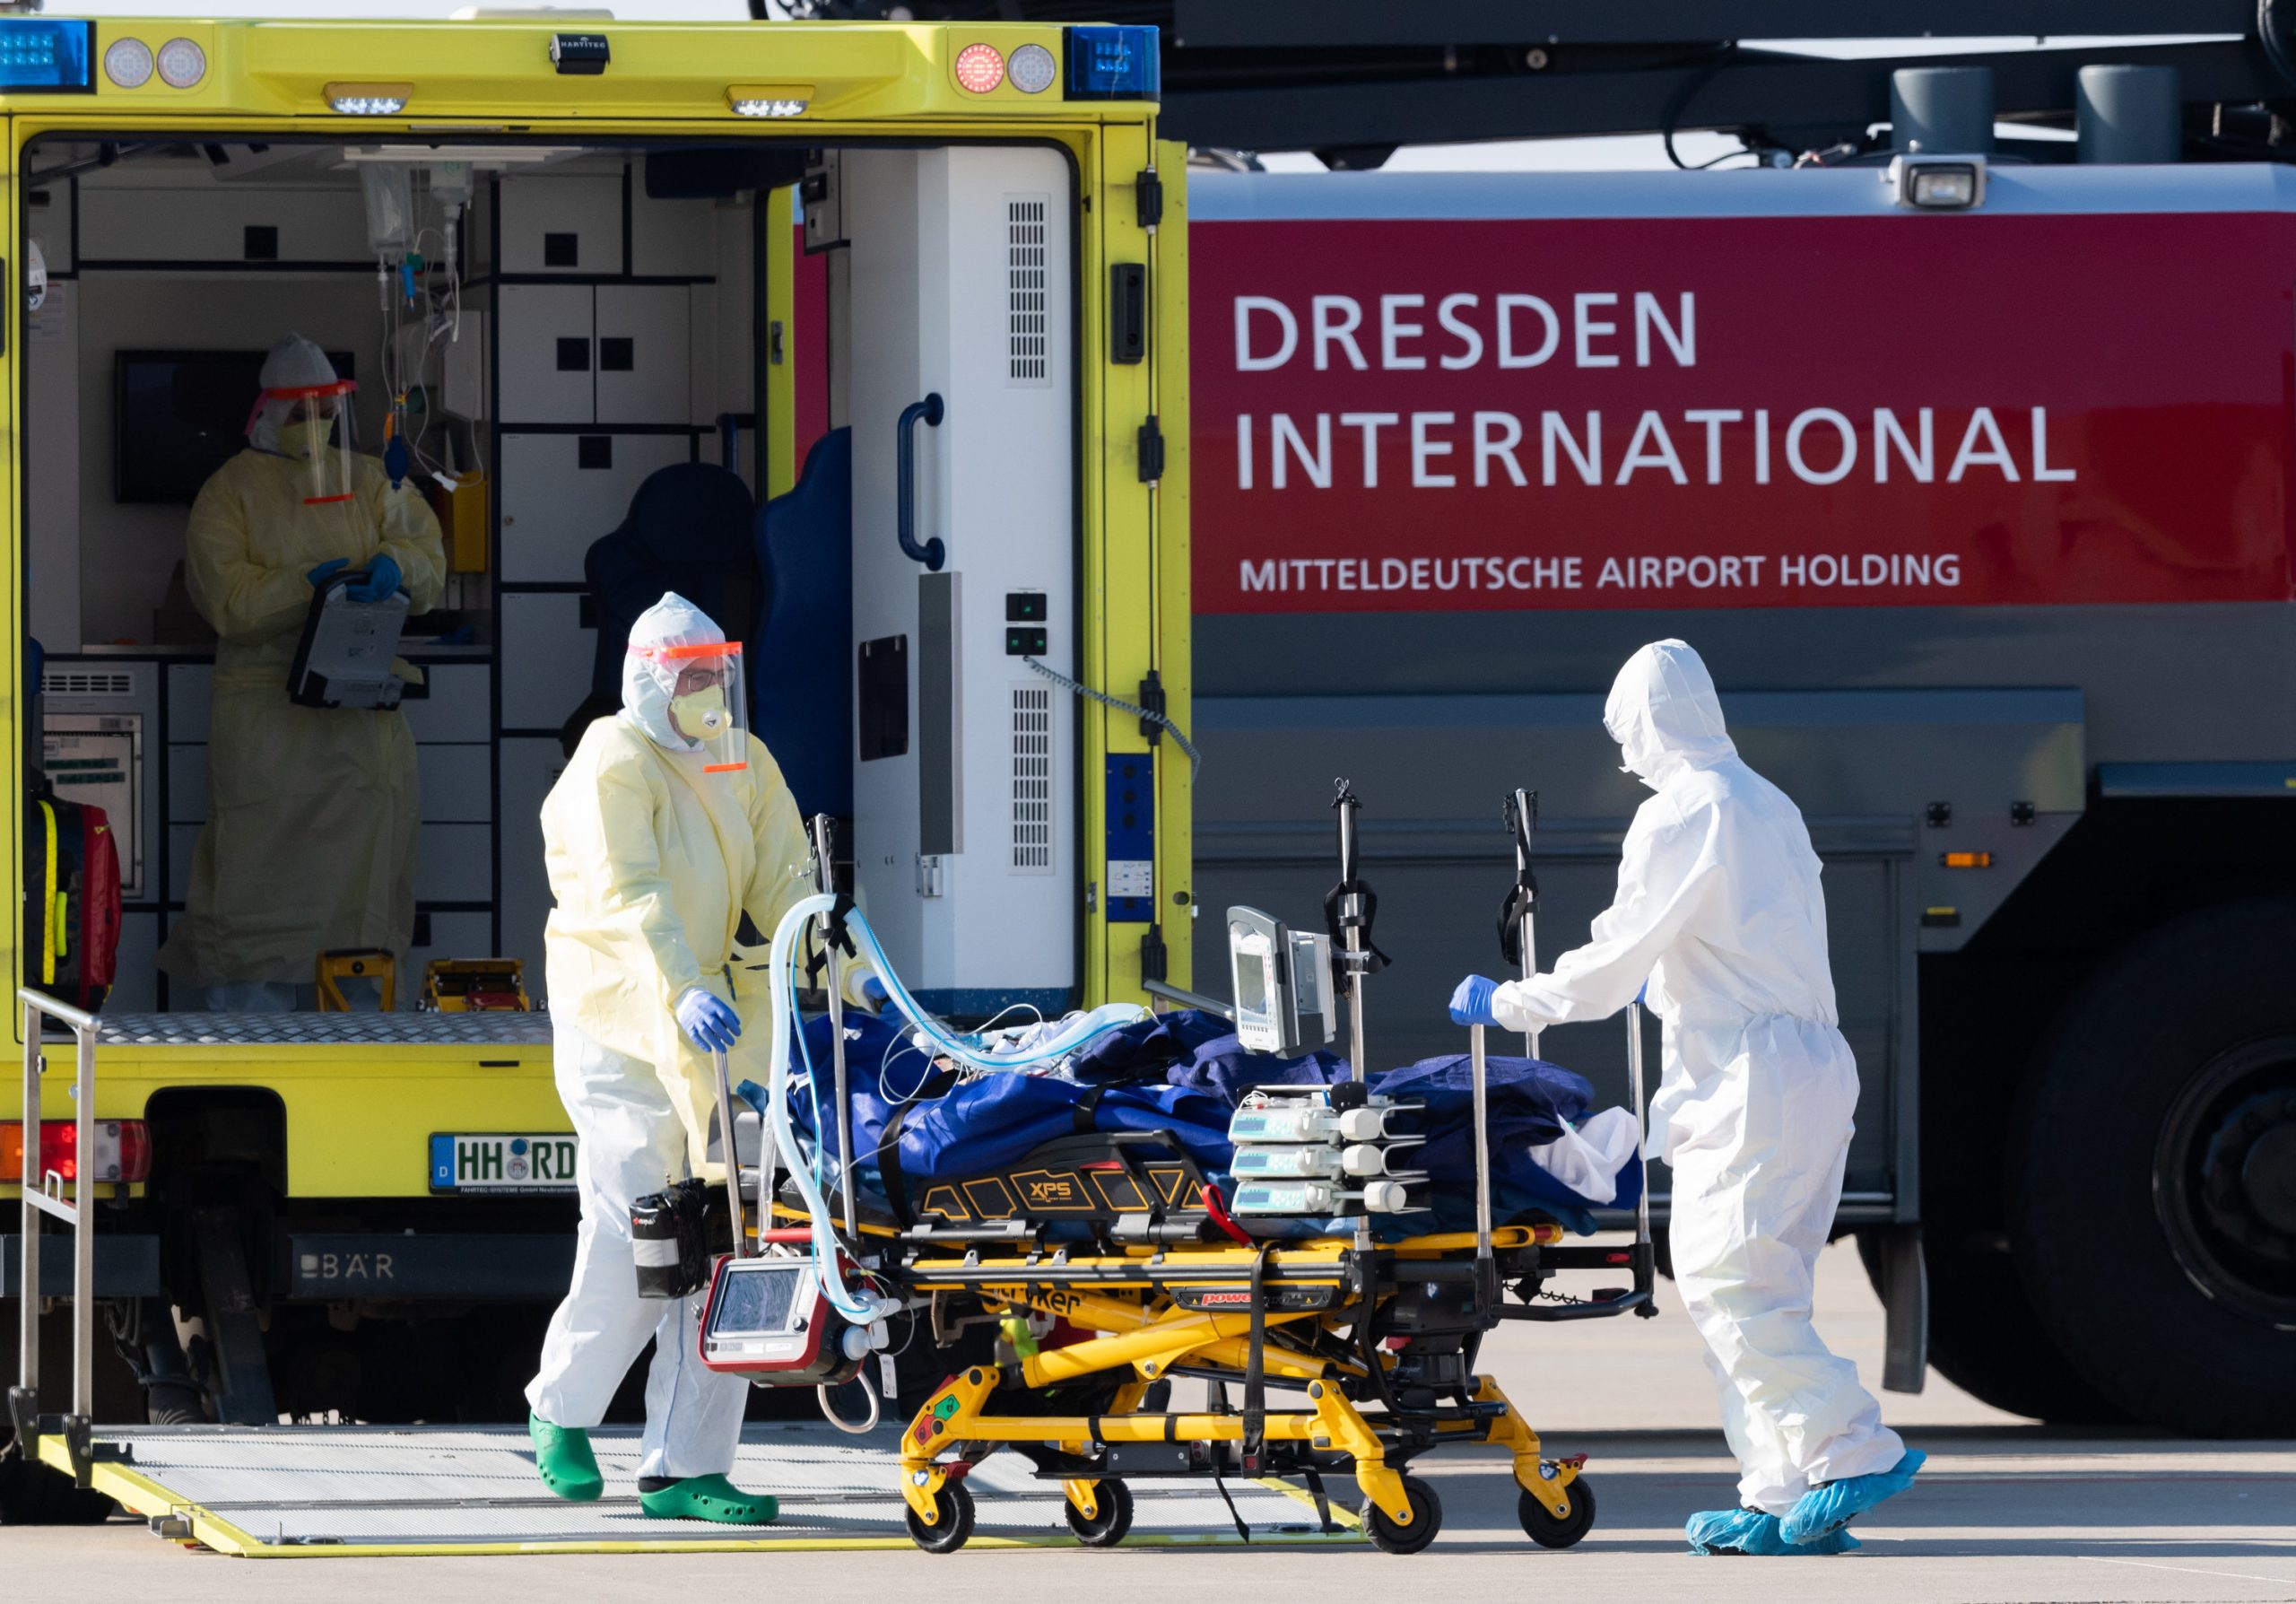 02 April 2020, Saxony, Dresden: A medical team transport a French coronavirus patient from the Learjet 45 ambulance plane to the ambulance at Dresden International Airport, to be treated at Dresden University Hospital. Photo: Robert Michael/dpa-Zentralbild/dpa